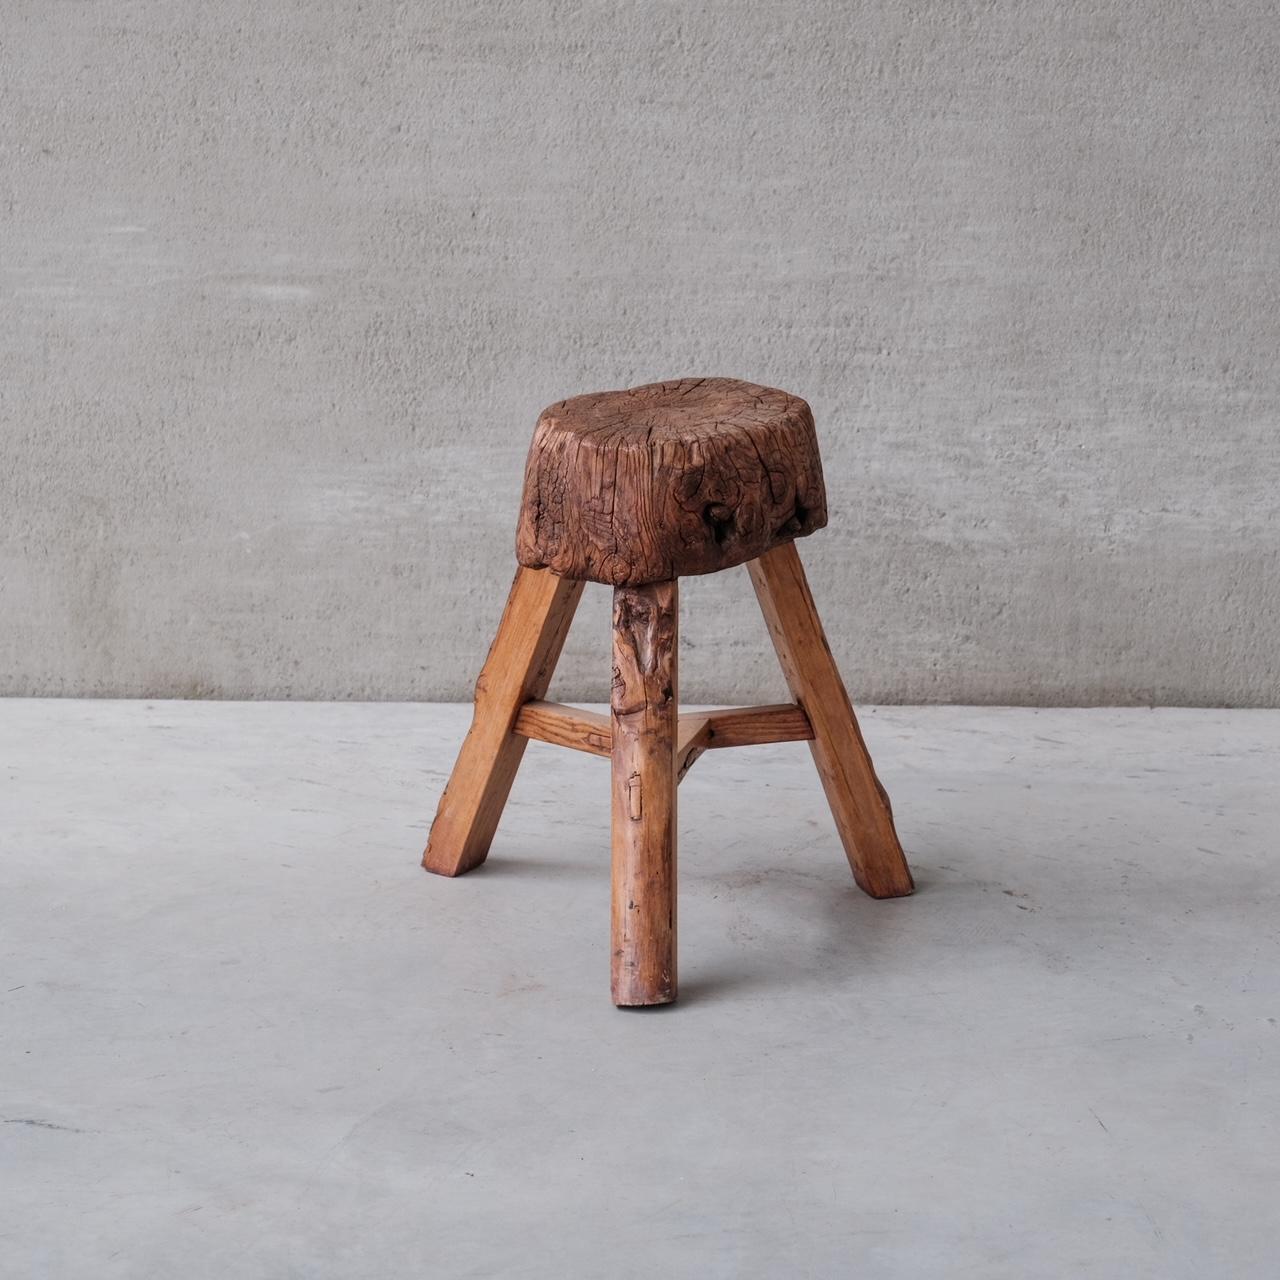 A primitive style butchers block or work block. 

France, c1930s. 

Raised over a tripod legs. Probably cut down at some point, now an ideal primitive style side table. 

Good antique condition. 

Location: Belgium Gallery. 

Dimensions: 54cm H x